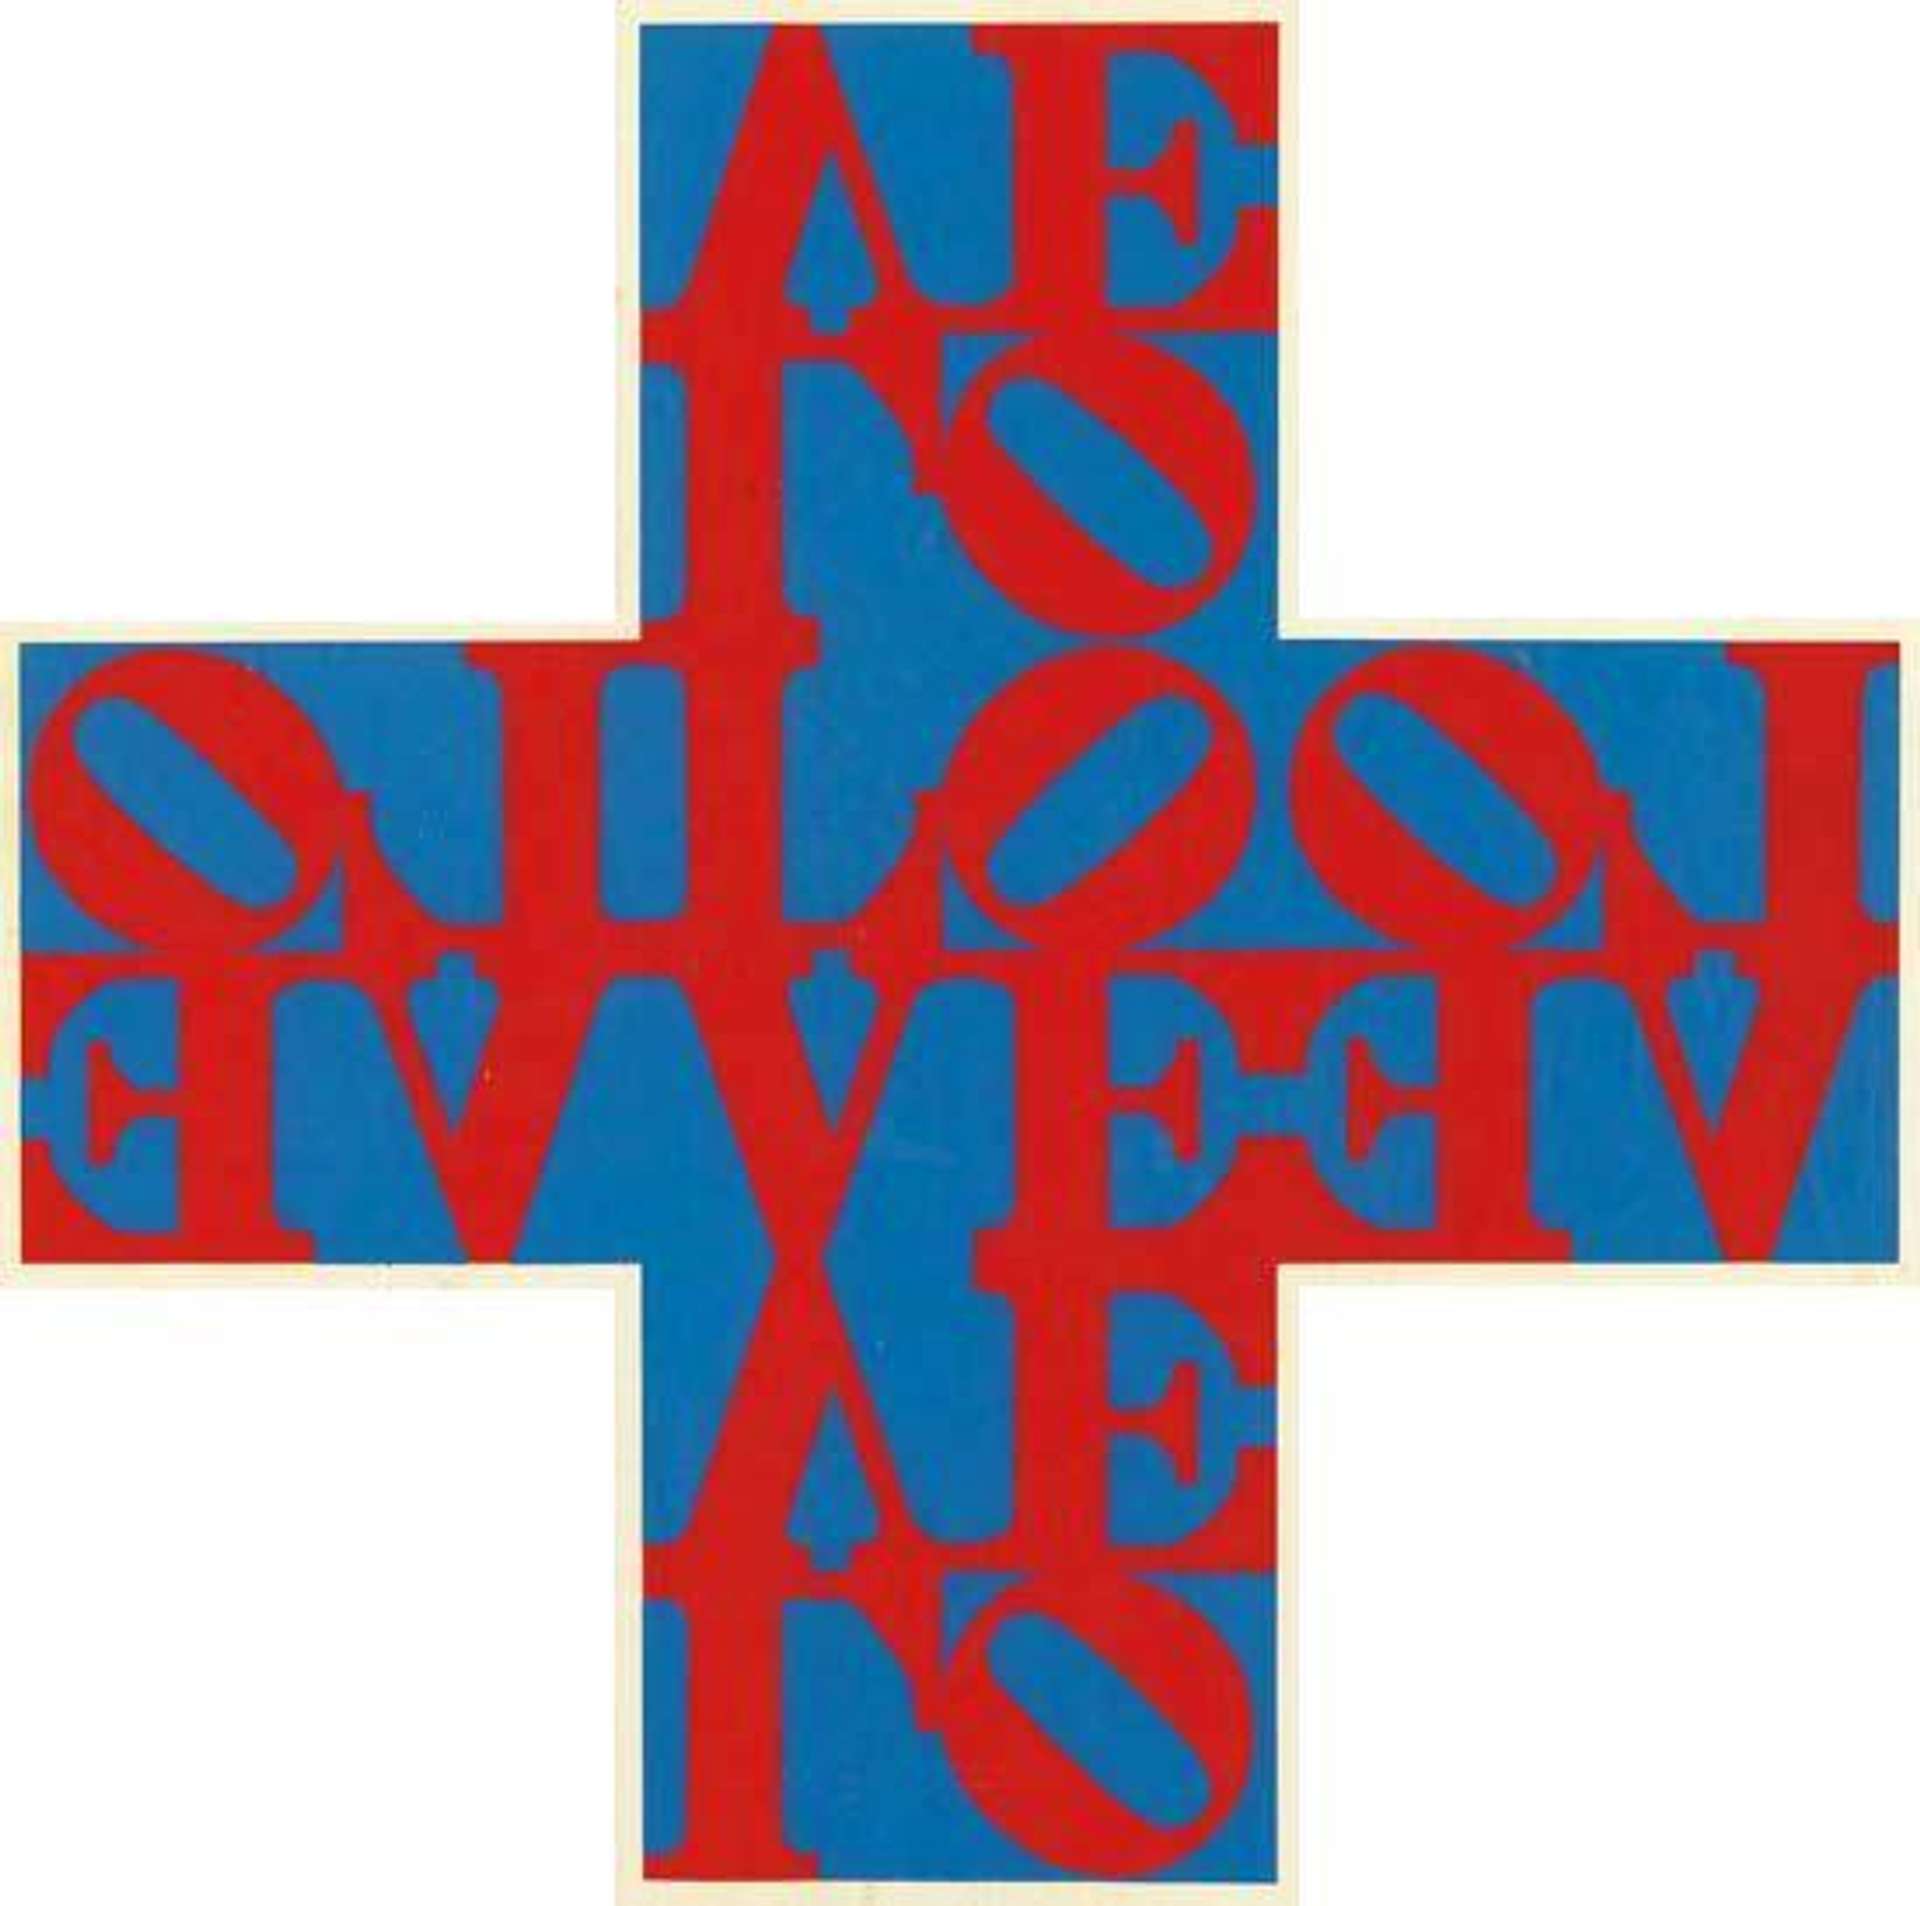 Love Cross (red and blue) - Signed Print by Robert Indiana 1968 - MyArtBroker